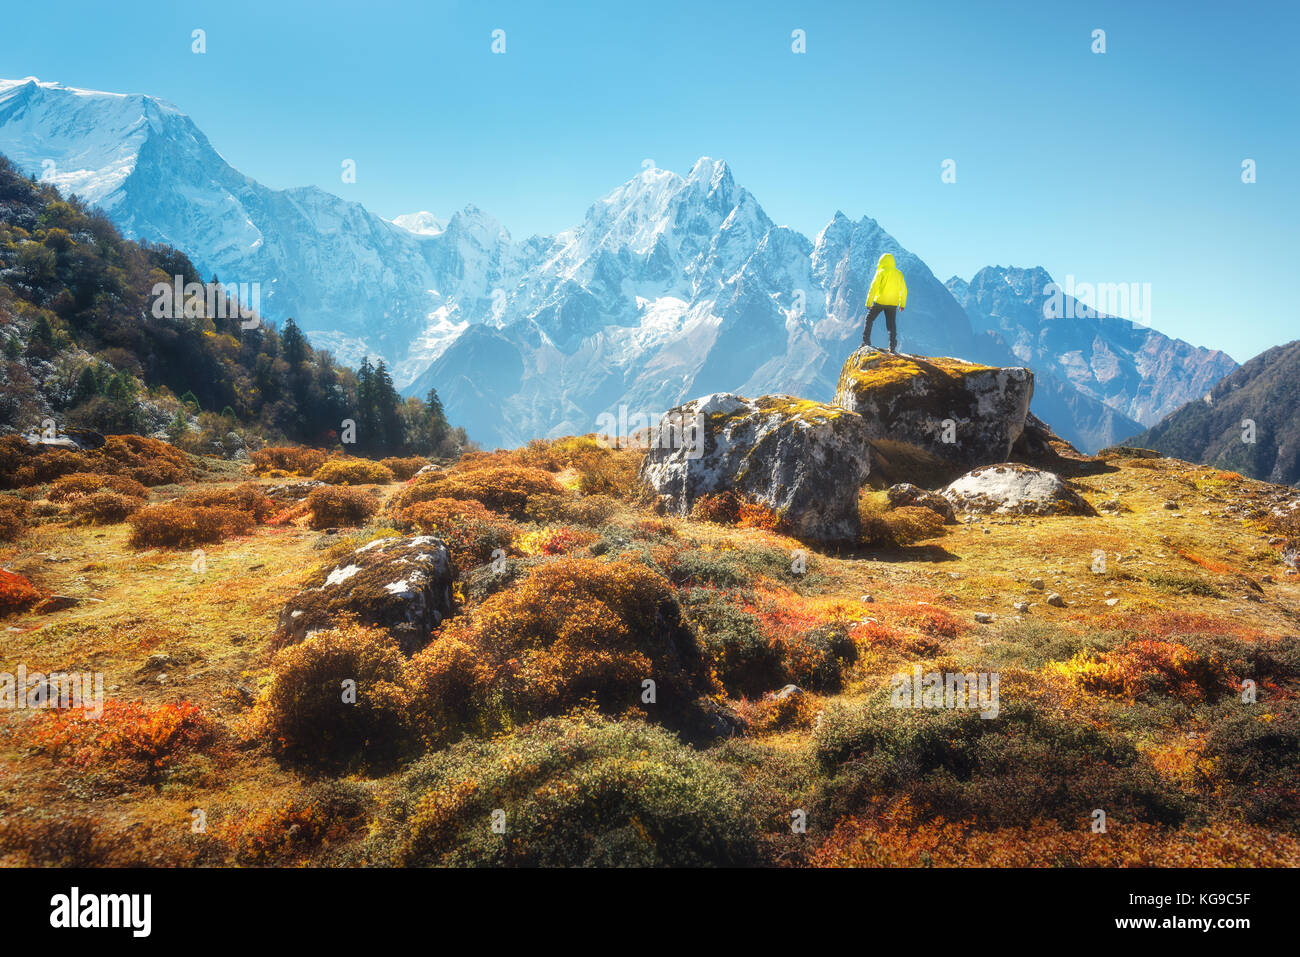 Standing man on the stone and looking on amazing Himalayan mountains. Landscape with traveler, high rocks with snowy peaks, plants, forest in autumn i Stock Photo